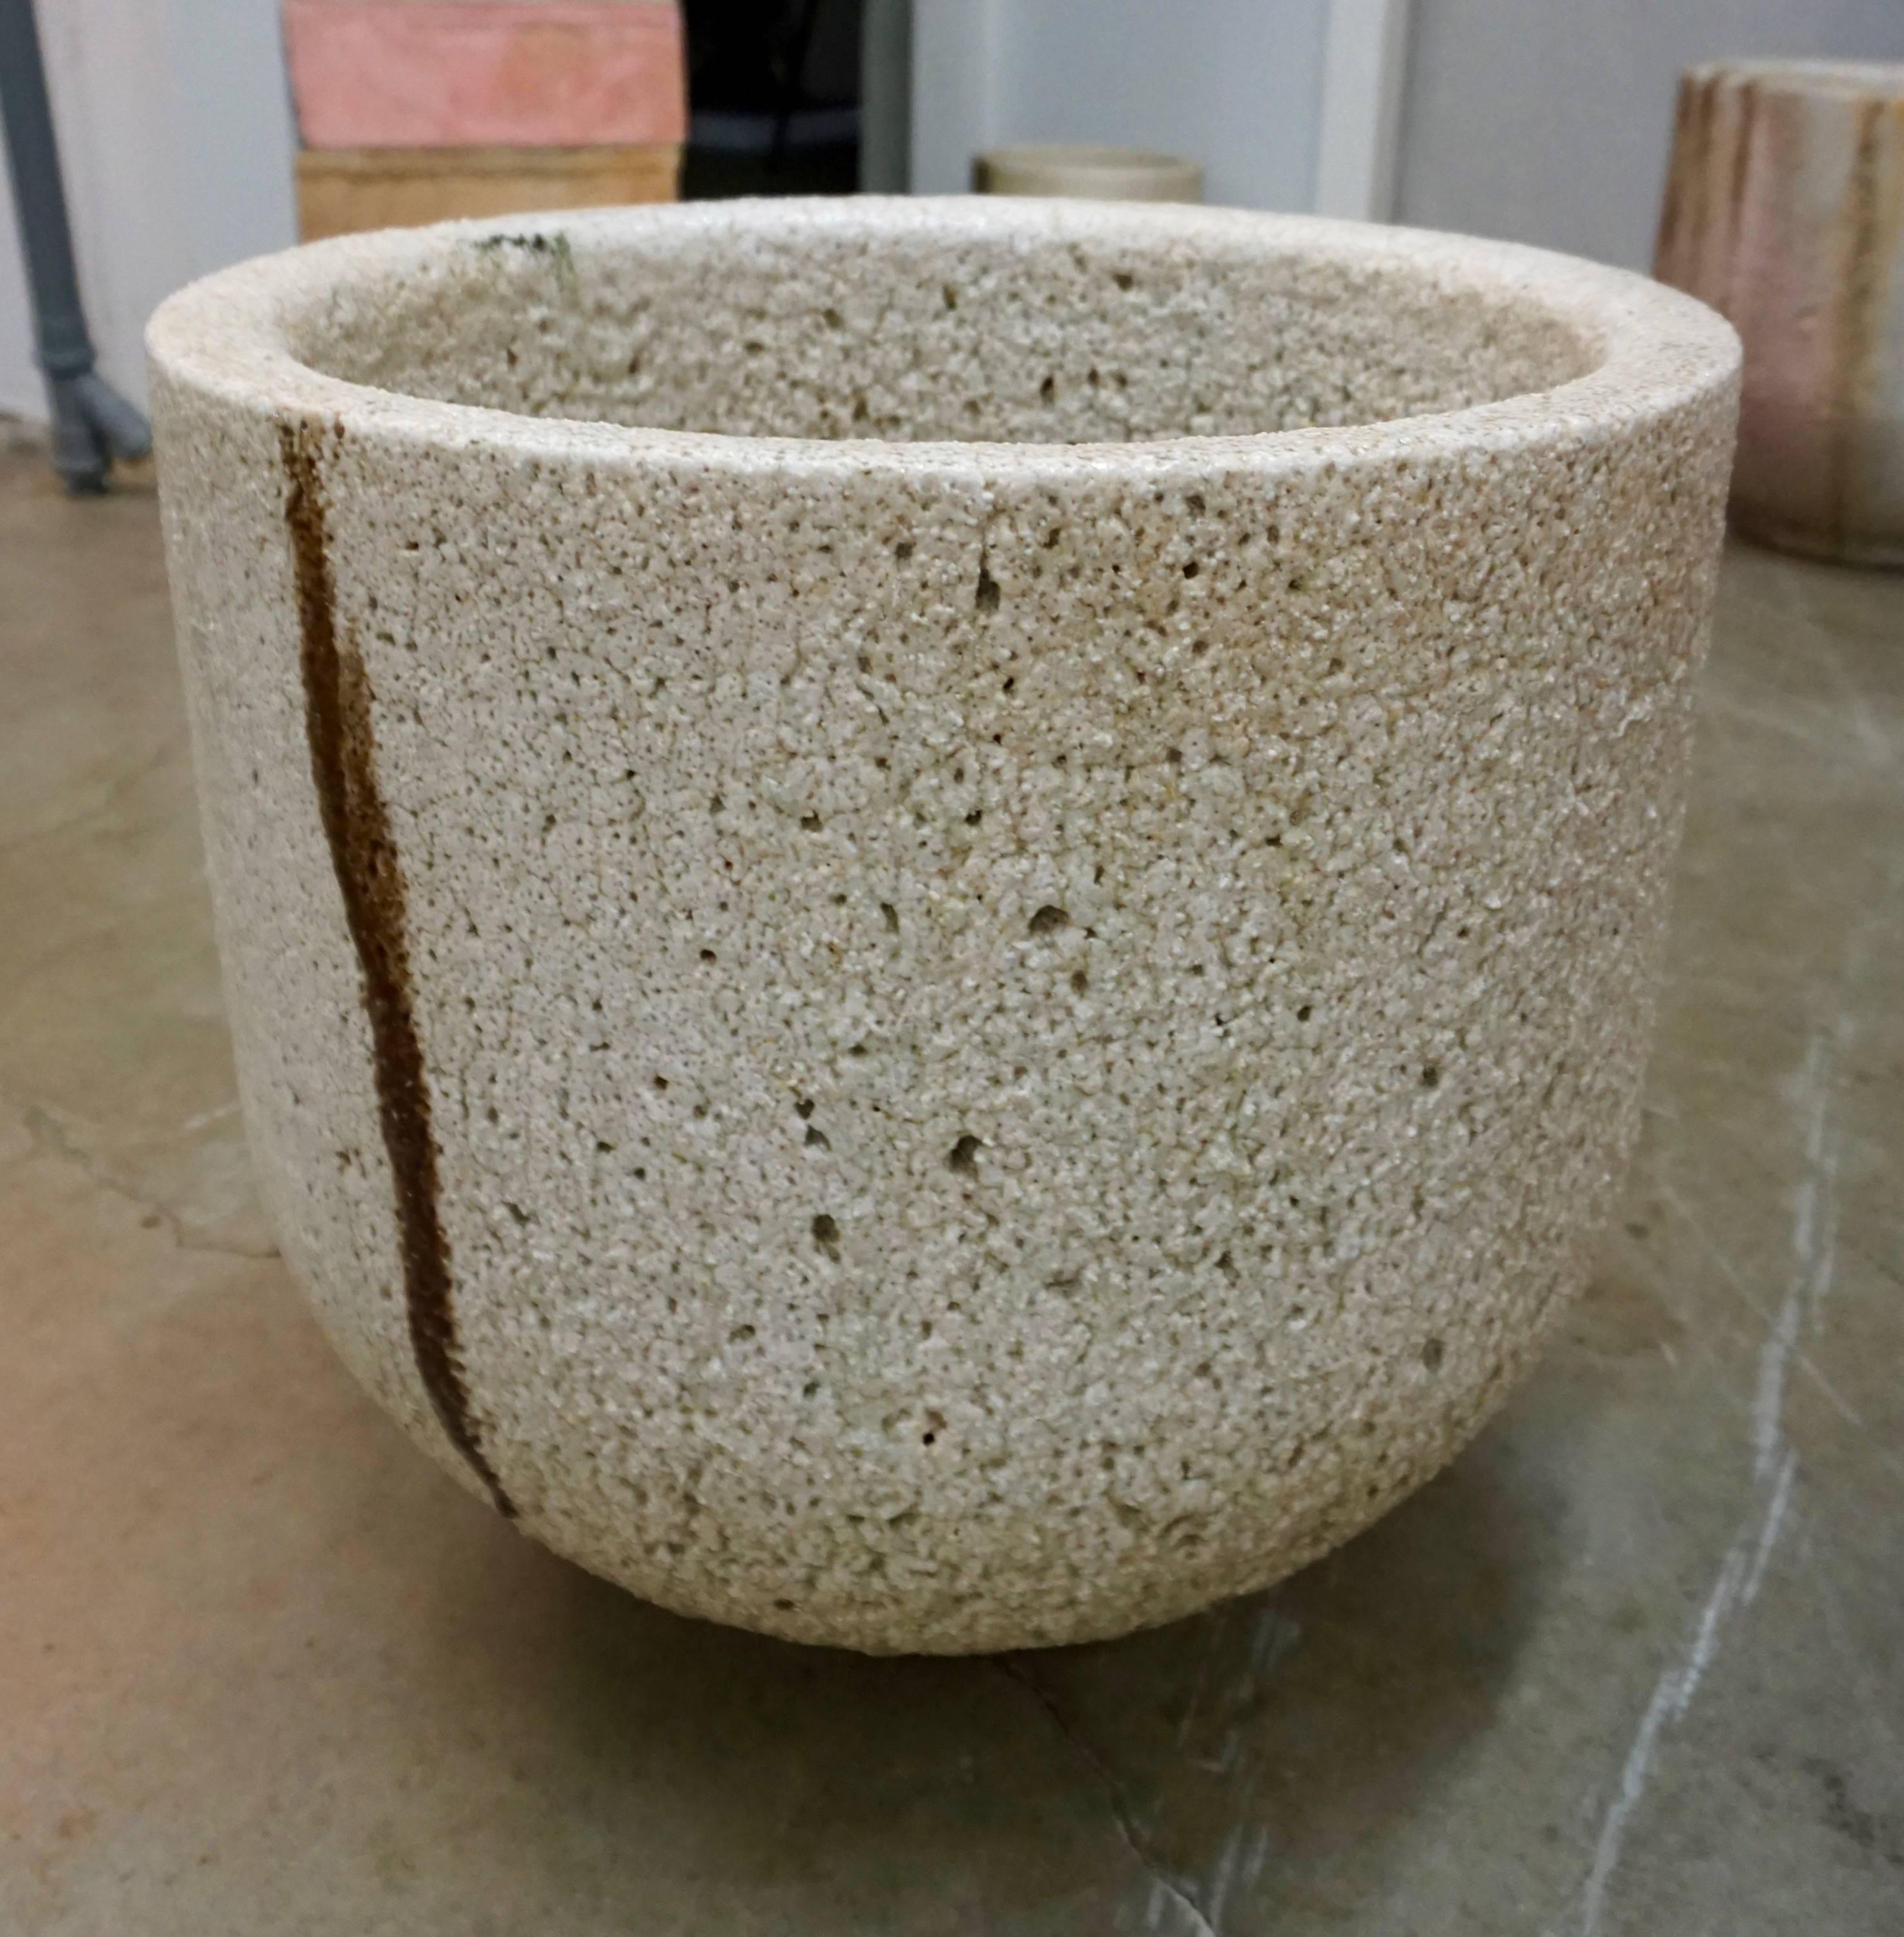 Ceramic vessel used by glaziers and glass blowers to melt glass at very high temperatures. Enhanced by the crackling, glass remnants and drippings. Can be used as a planter or decorative object, indoors or outdoors.
Multiple crucibles available.